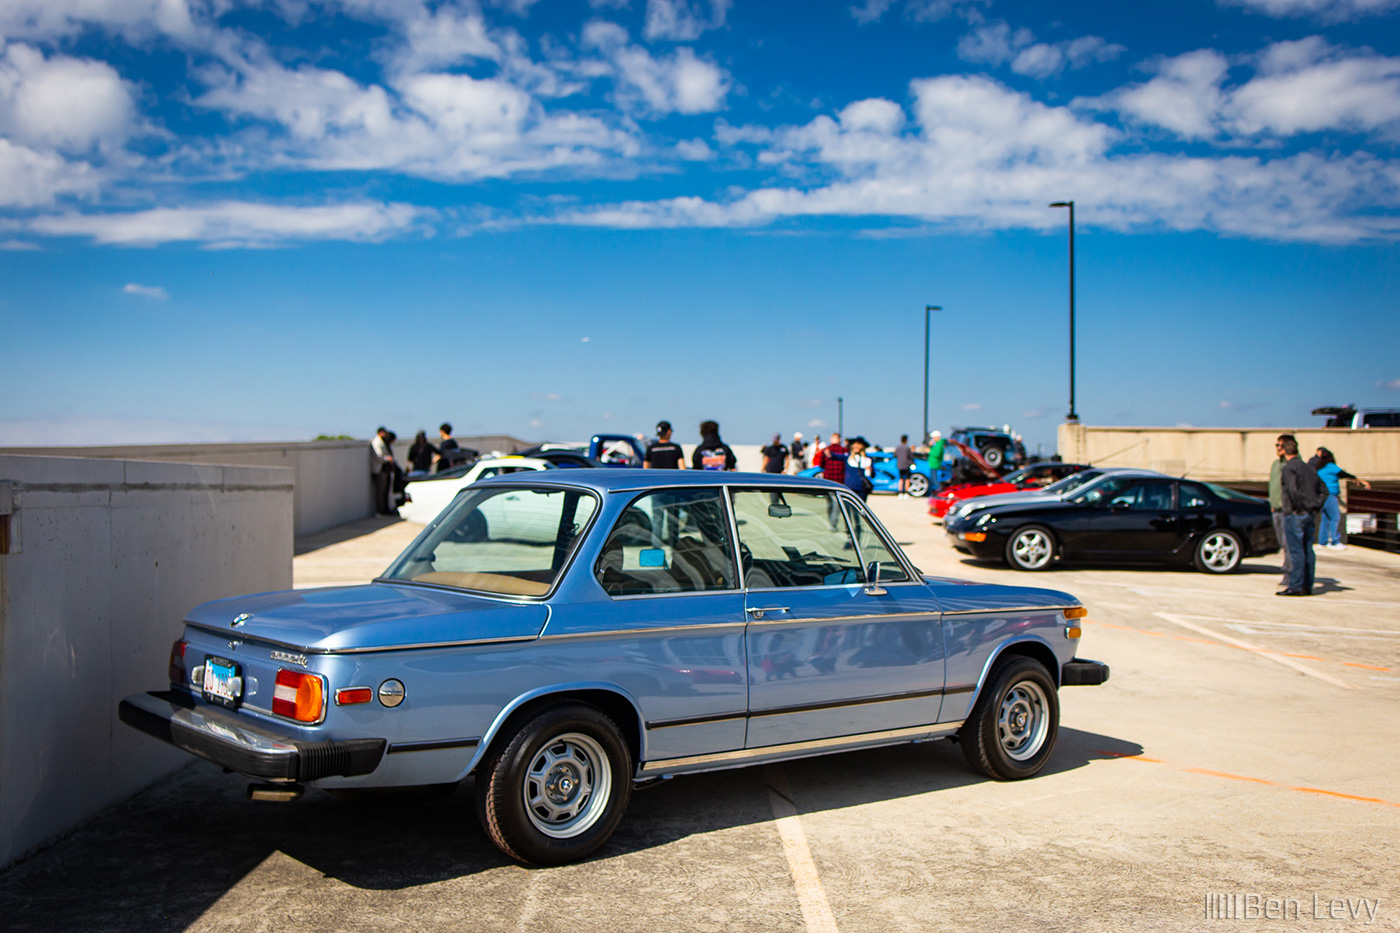 Light Blue BMW 2002 tii at Car Meet in Chicago